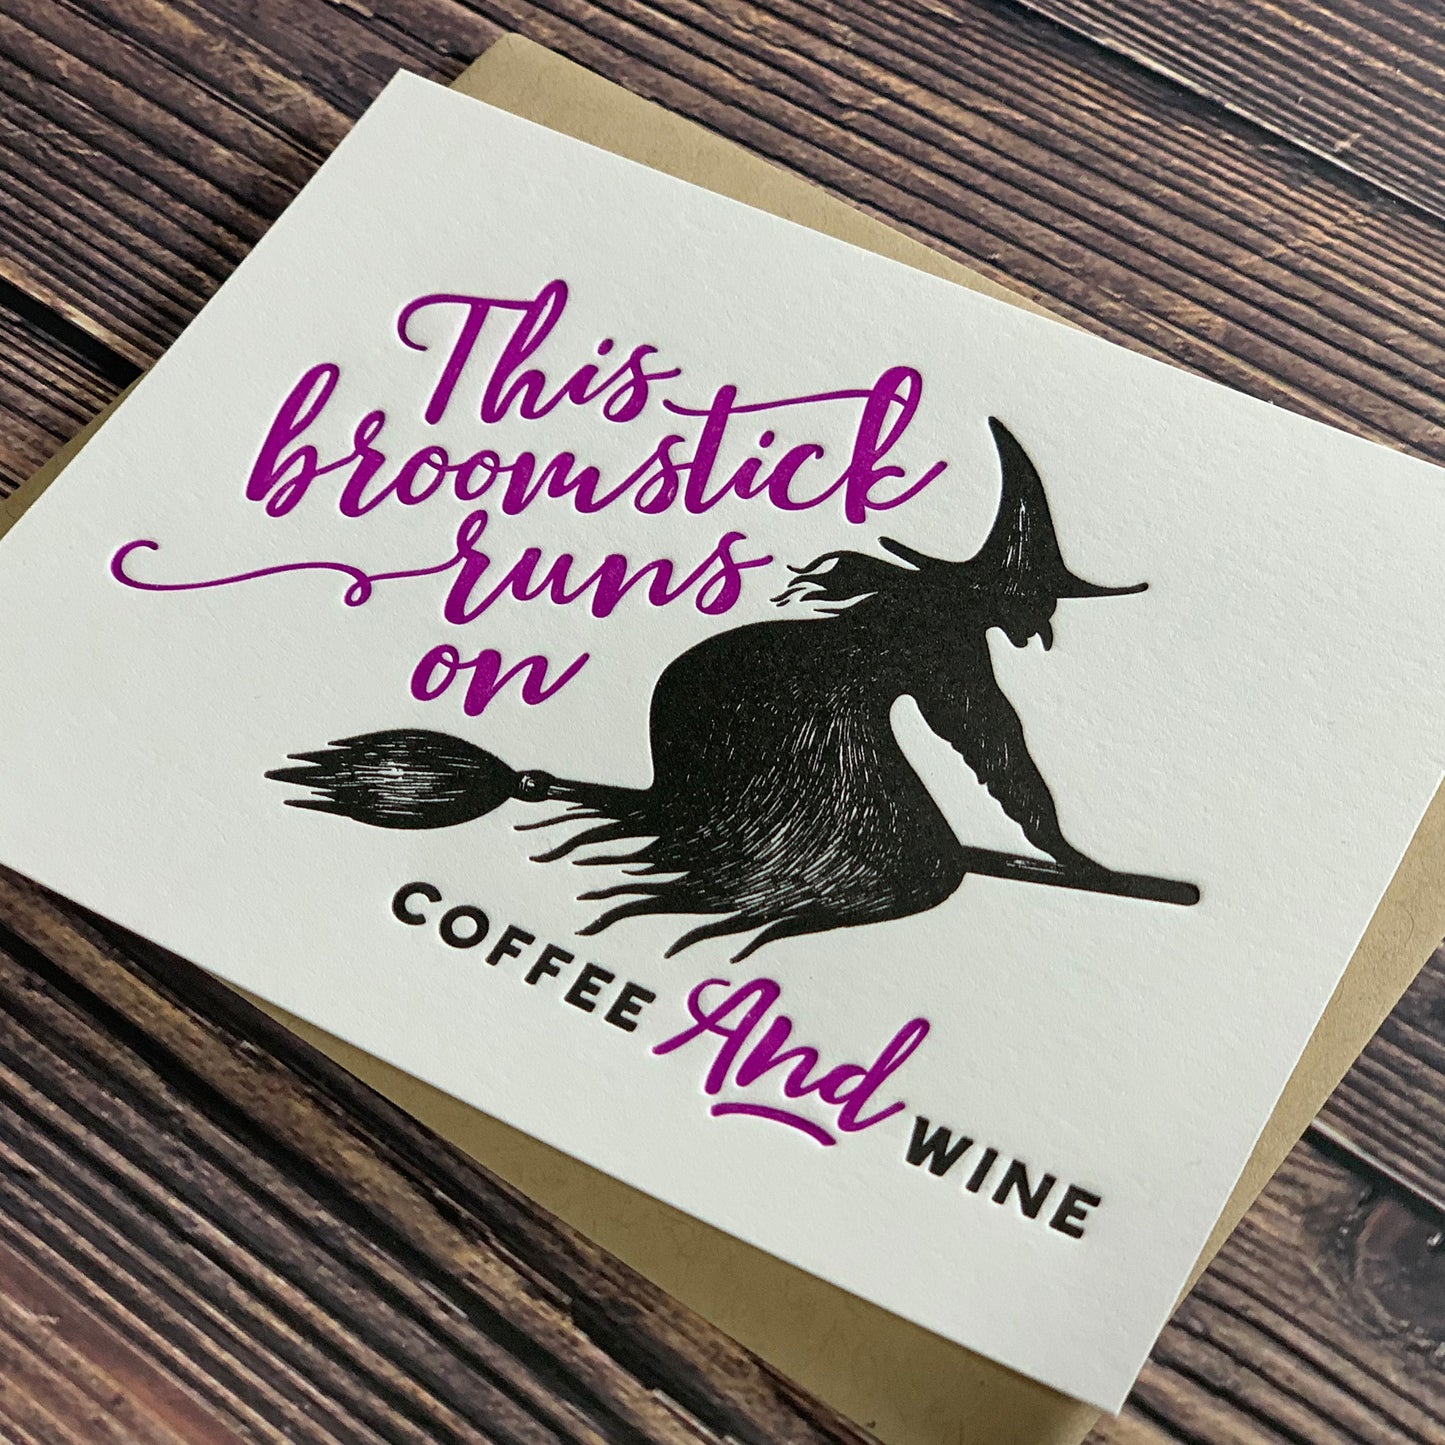 Halloween Card. This Broomstick runs on coffee and wine, Happy Halloween. Letterpress printed, view shows letterpress impression,  includes envelope